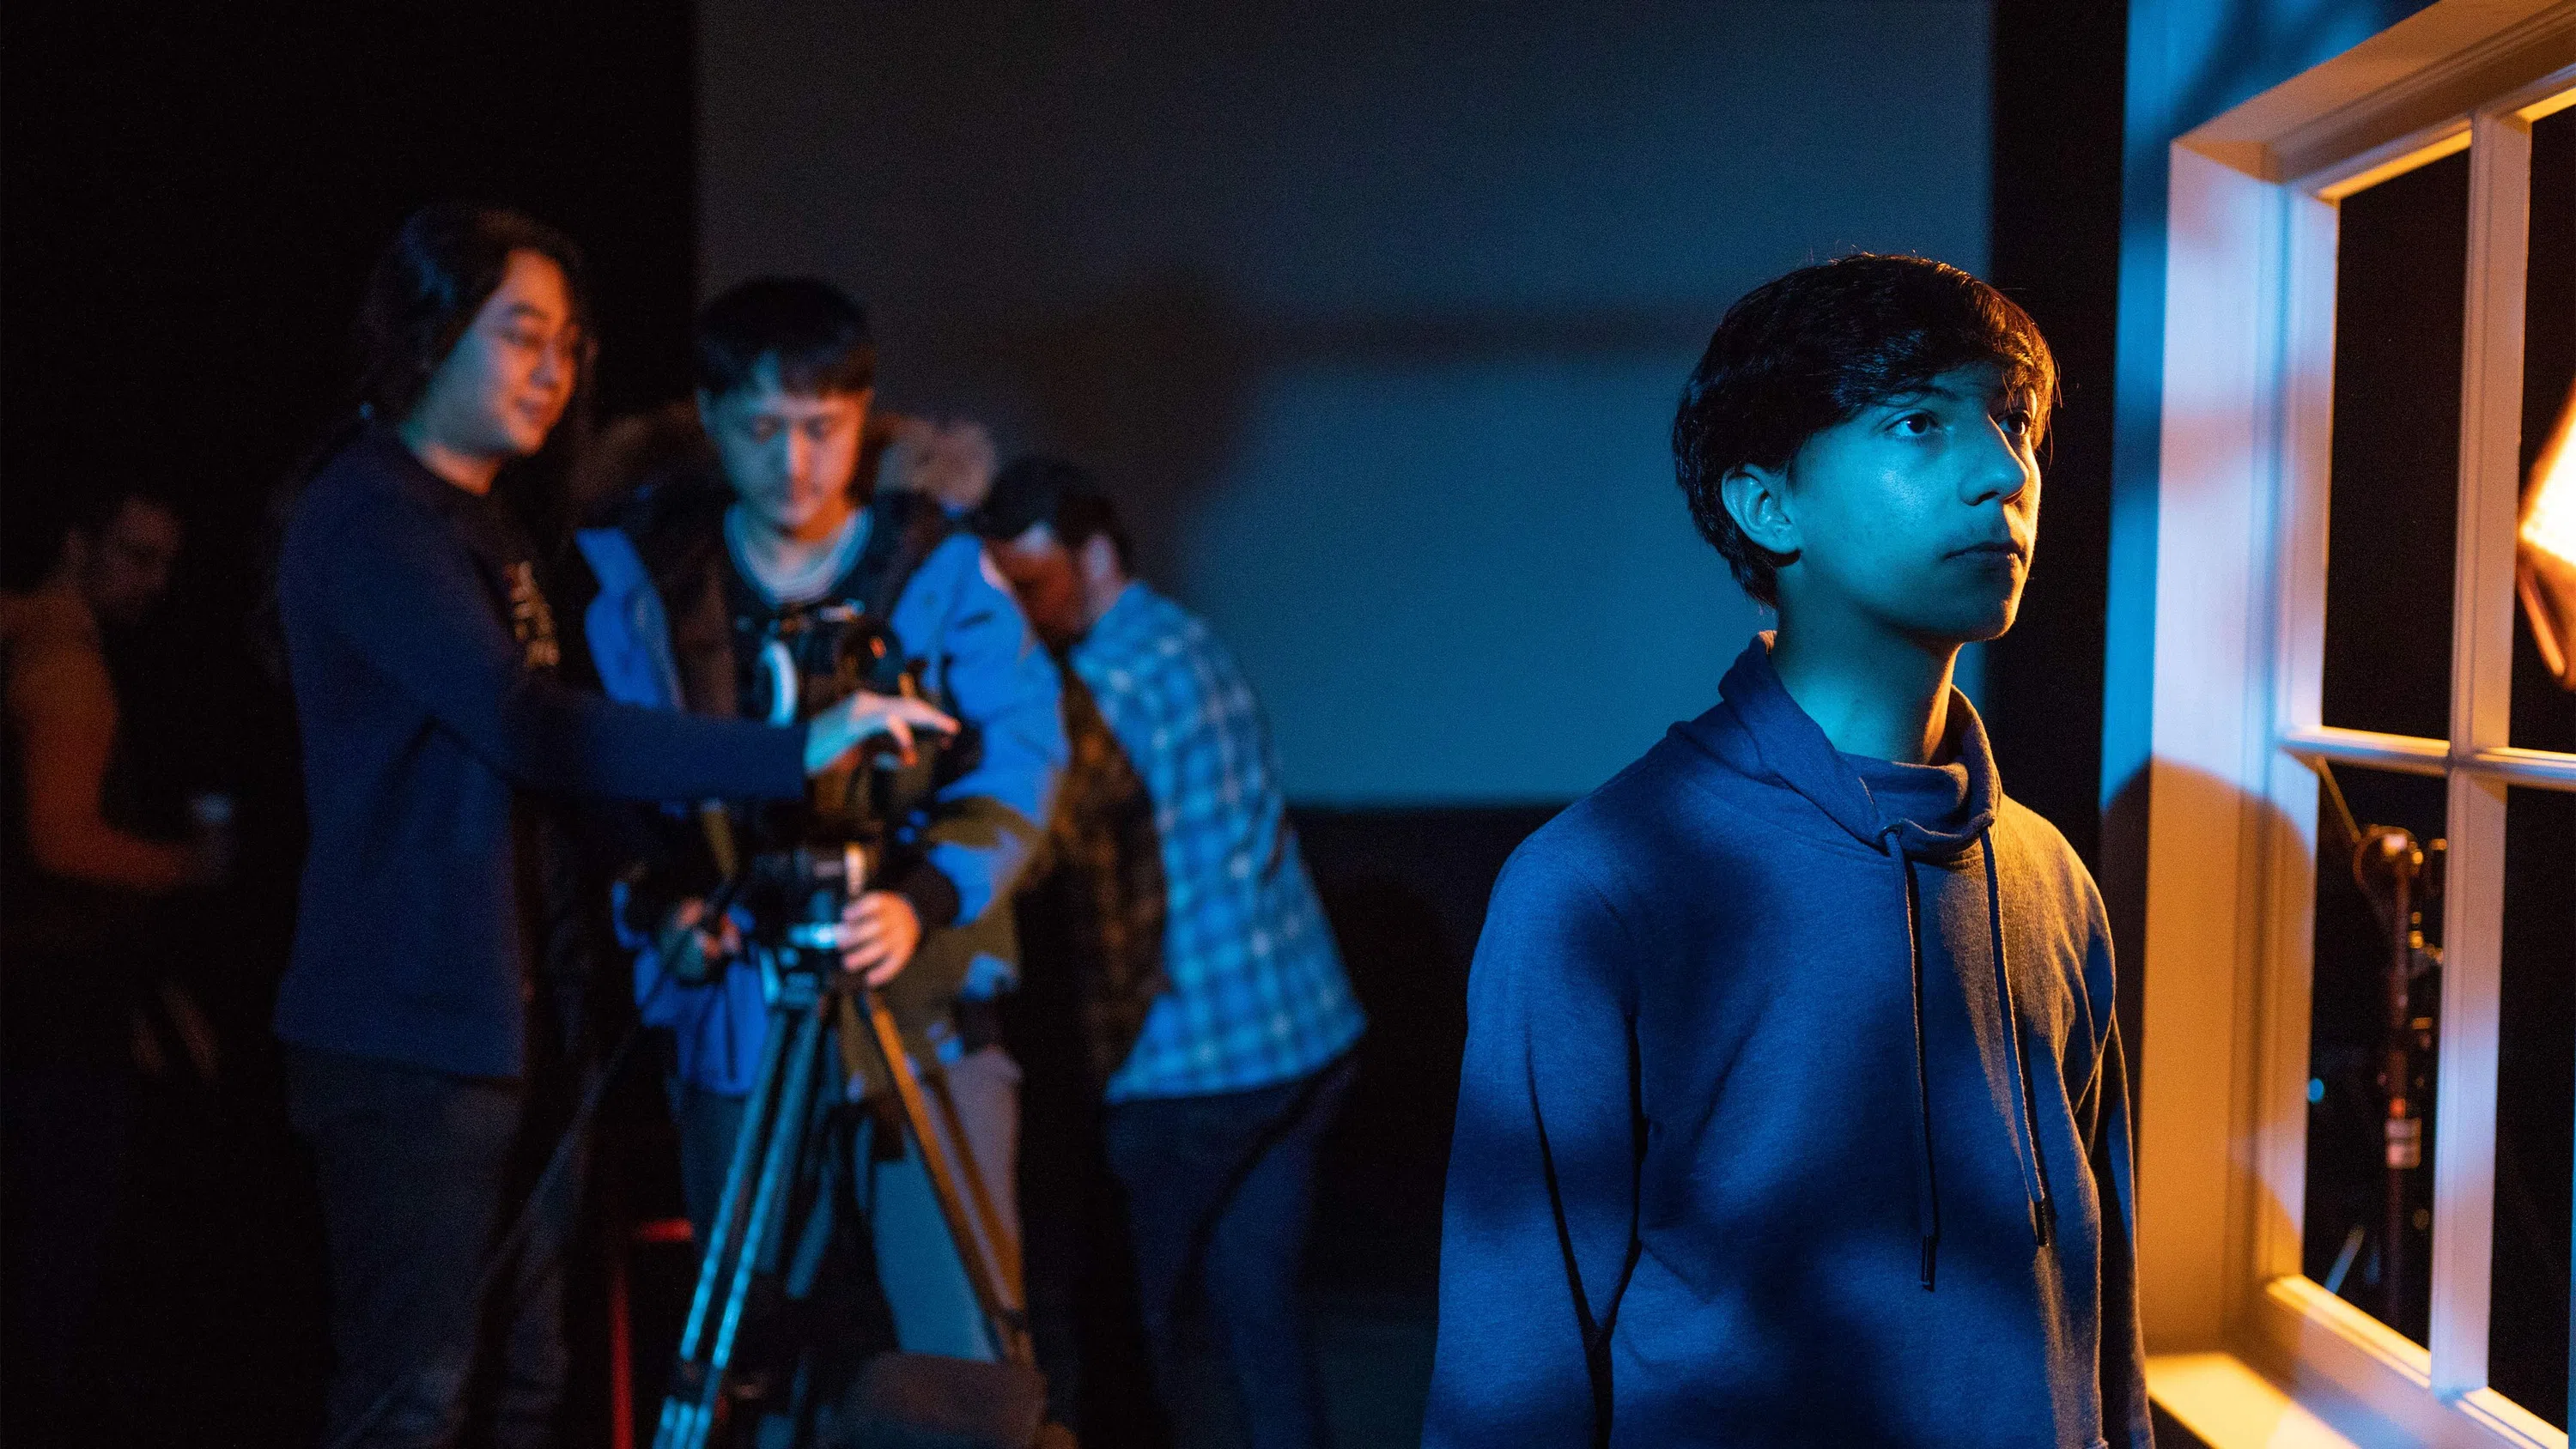 Two student-cinematographers film an actor on stage in dramatic blue lighting.